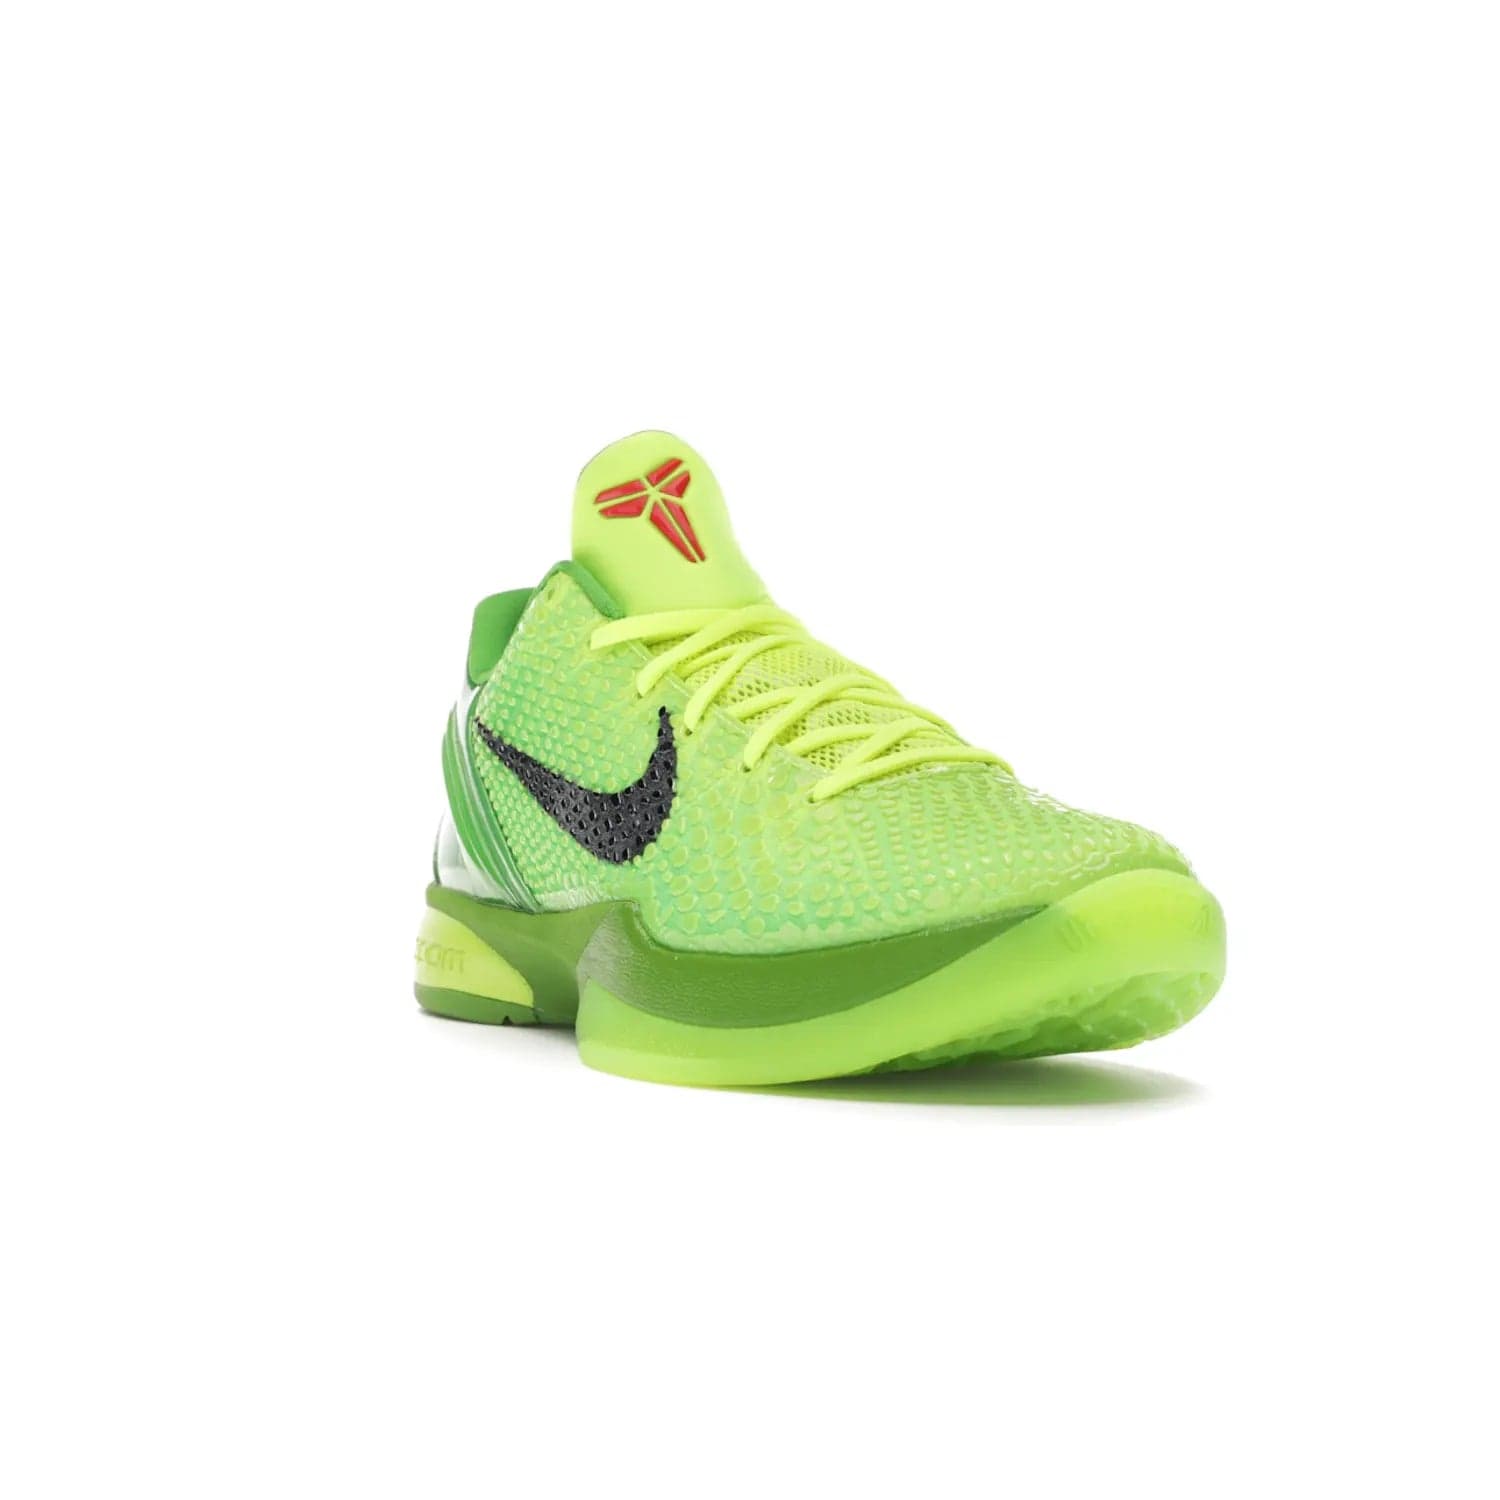 Nike Kobe 6 Protro Grinch (2020) - Image 7 - Only at www.BallersClubKickz.com - #
The Nike Kobe 6 Protro Grinch updates the iconic 2011 design with modern tech like a Zoom Air cushioning system, scaled-down traction, and updated silhouette. Experience the textured Green Apple and Volt upper plus bright red and green accents for $180.